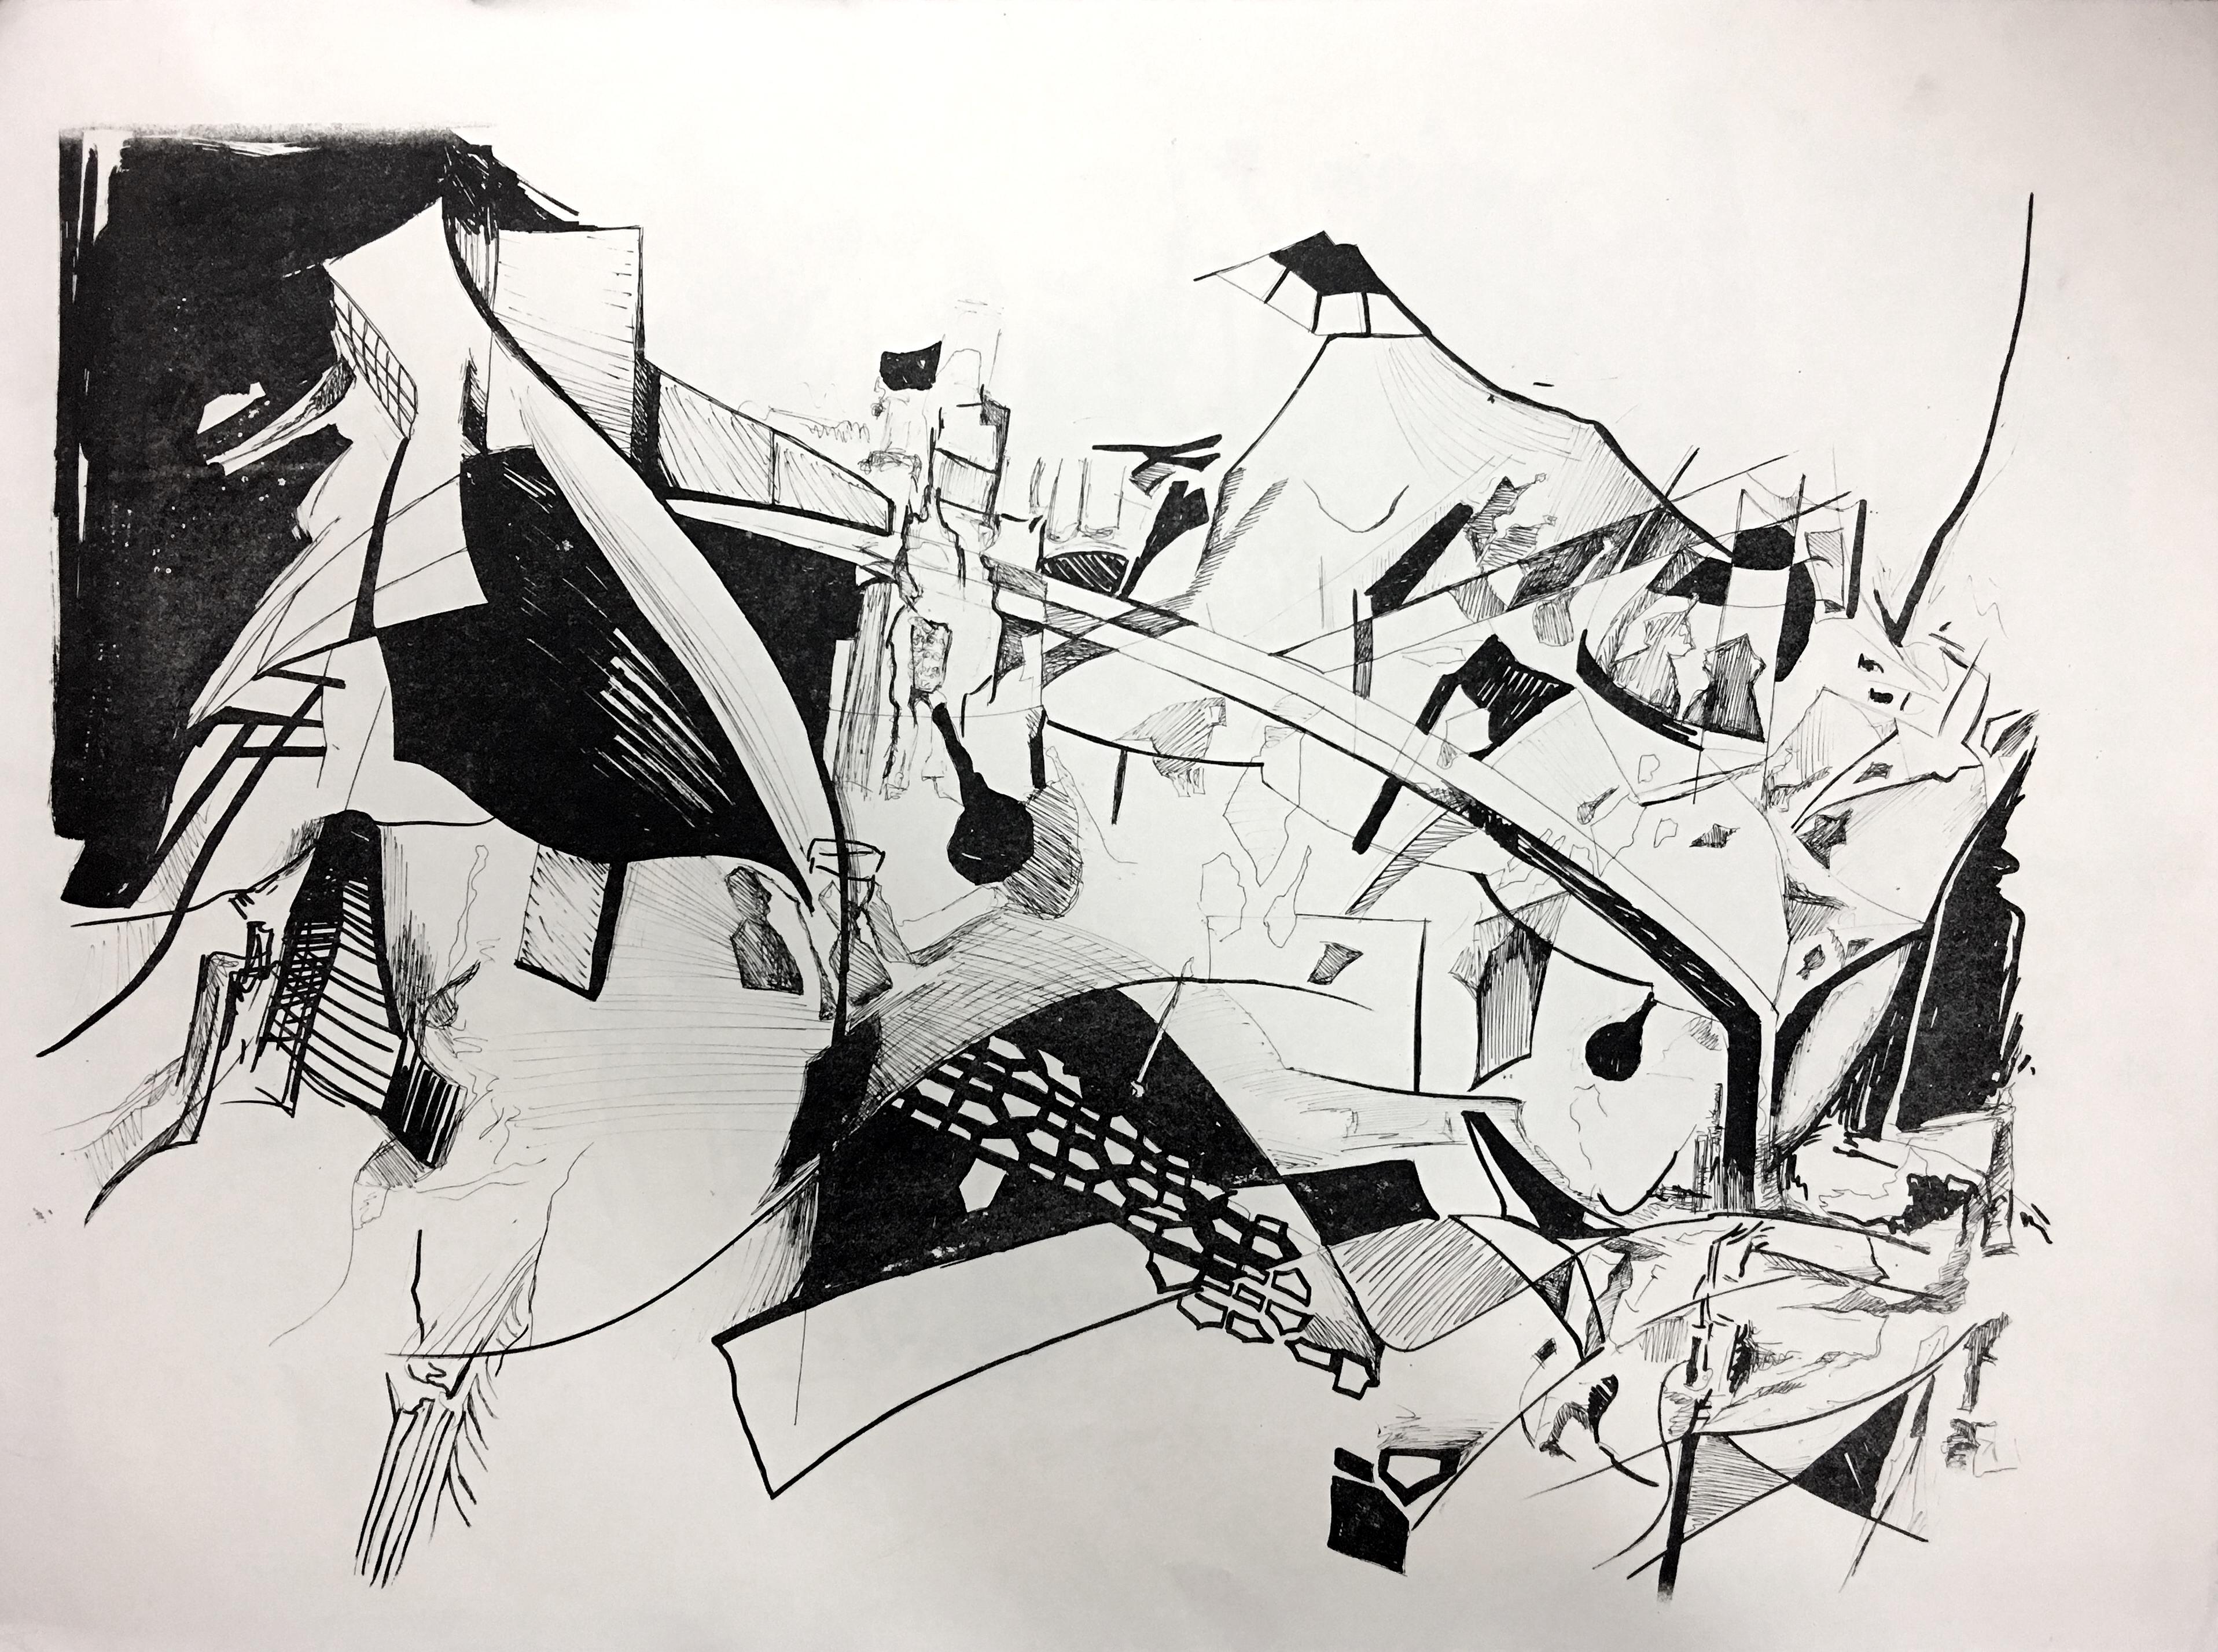 Zahra Nazari Abstract Print - "Journey number 3" abstracts a lively Persian bazaar in black and white